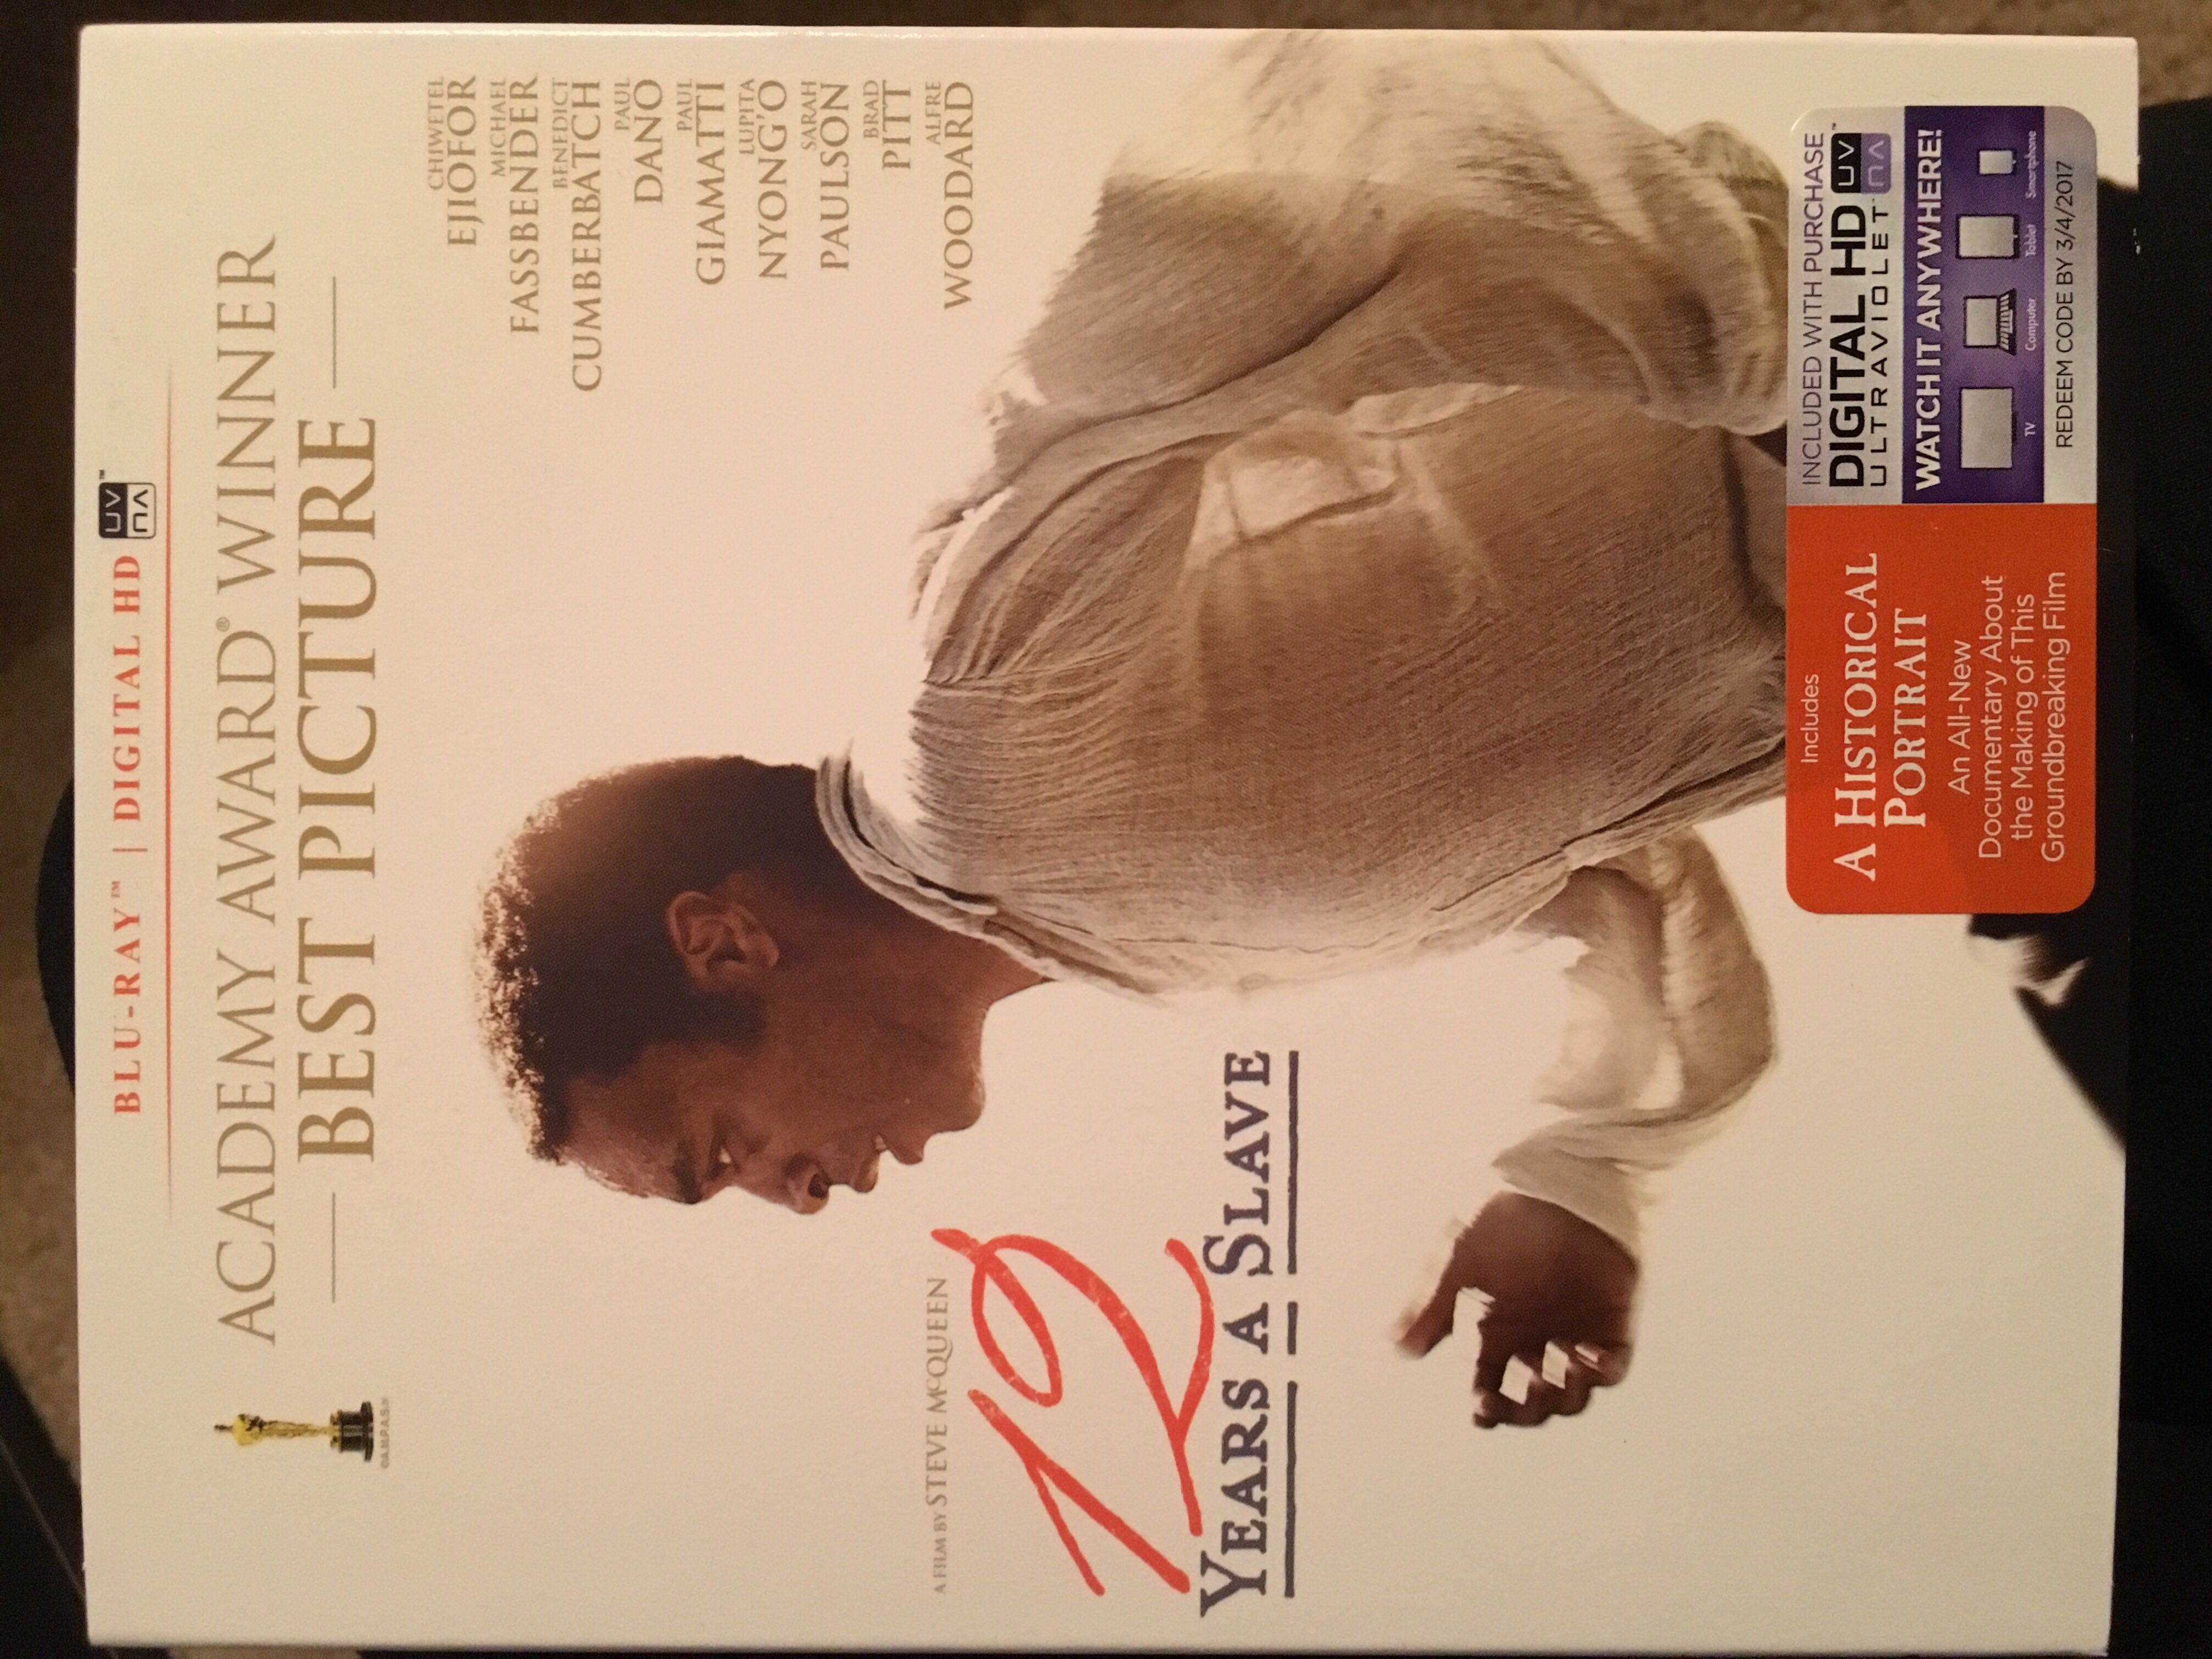 12 Years a Slave Blu-ray movie collectible [Barcode 024543881018] - Main Image 3